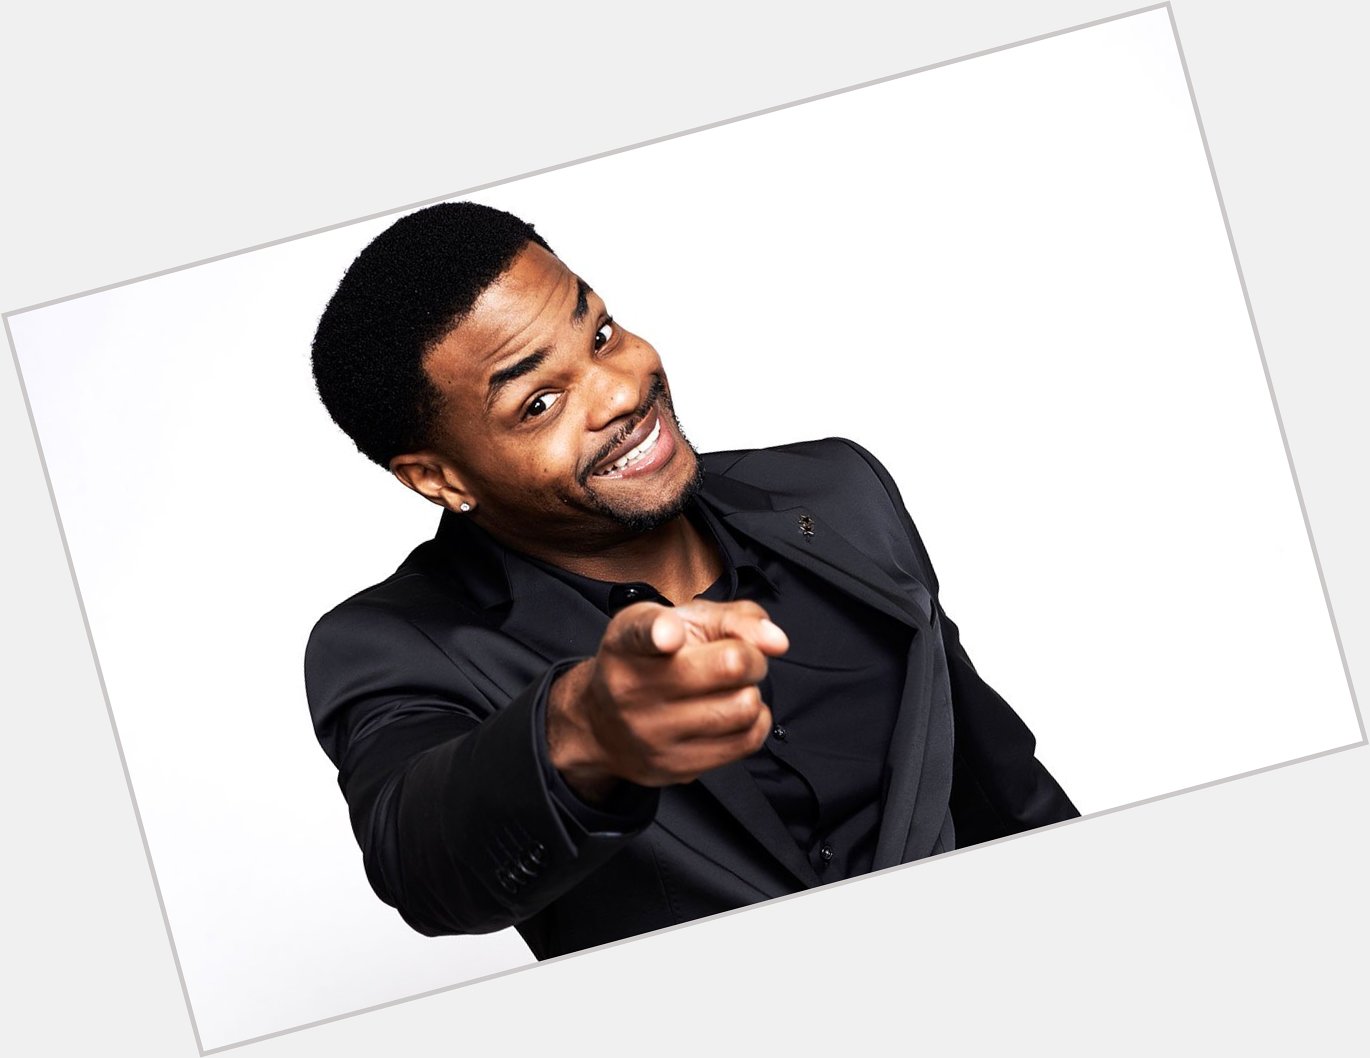 Happy Birthday to King Bach    About:  